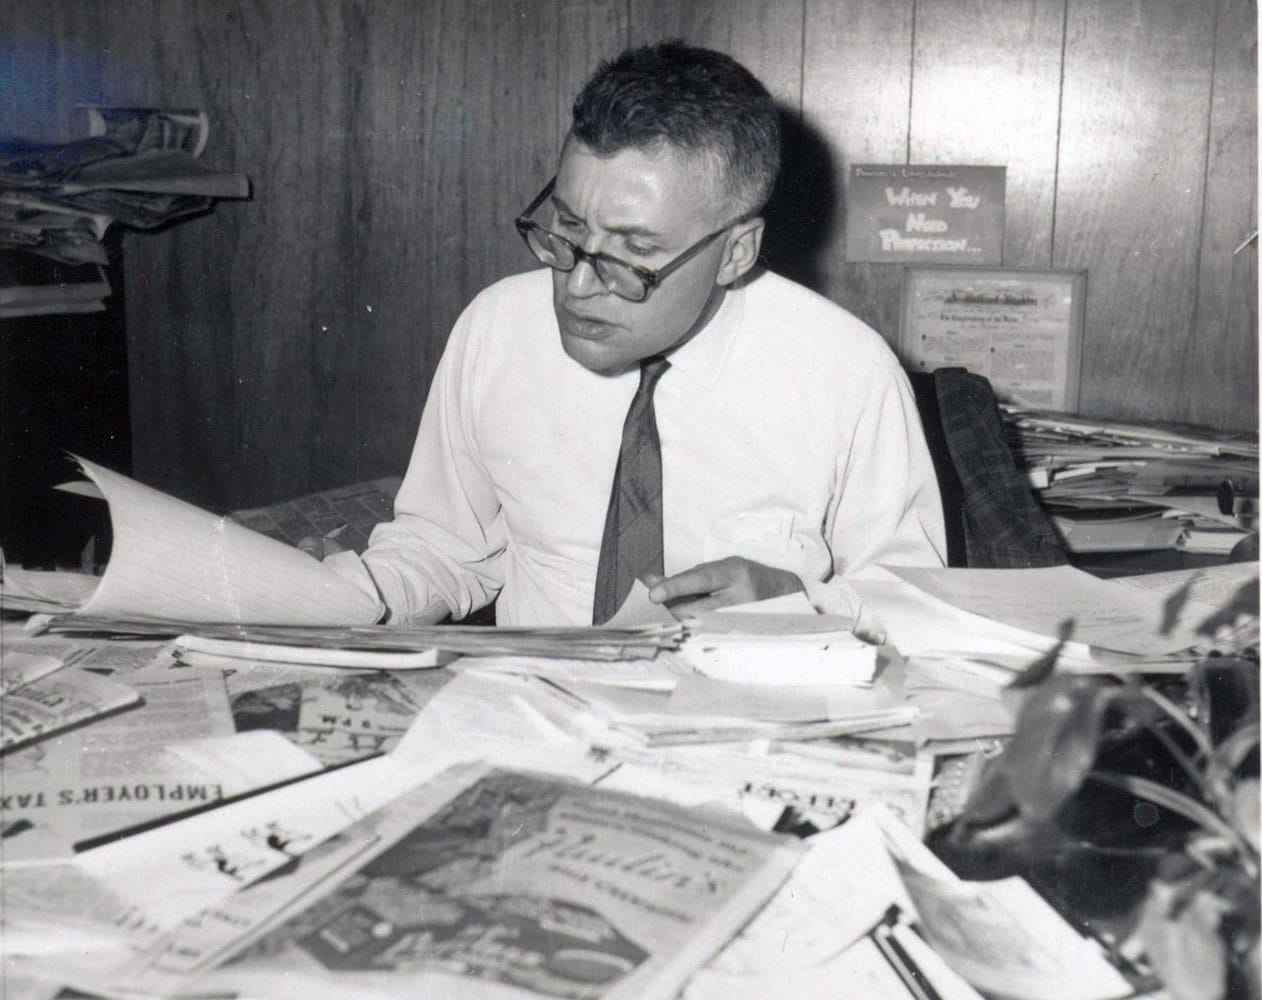 Hal is shown above at his legendary desk in his Post-Record office in April 1966, with papers displayed visibly.